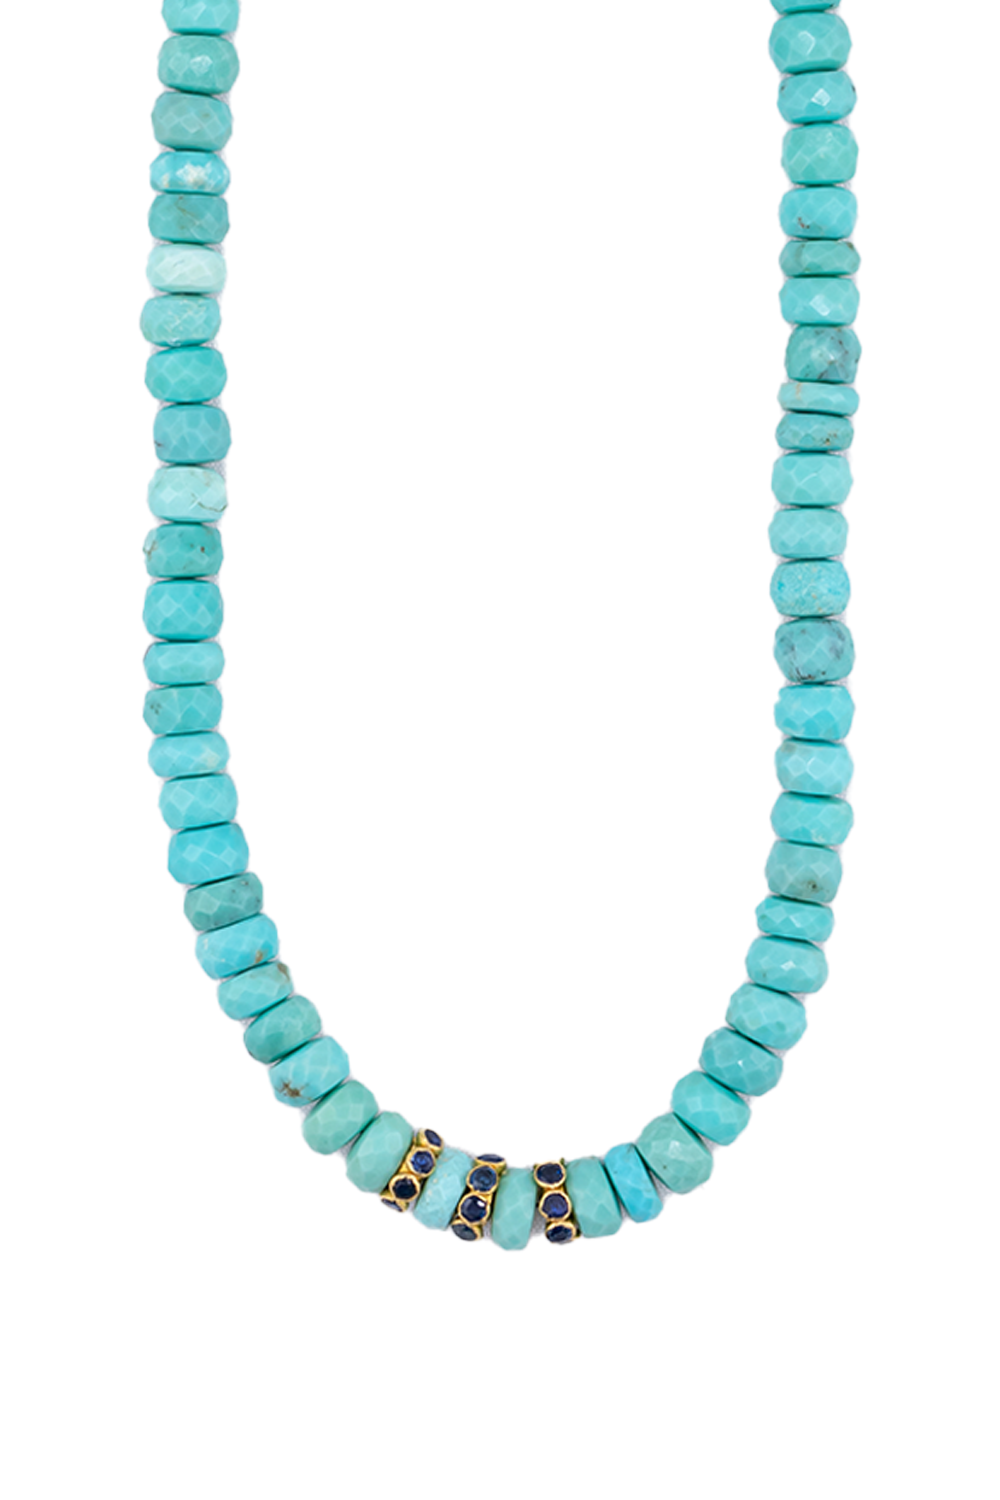 Faceted Sleeping Beauty Sapphire Bead Necklace